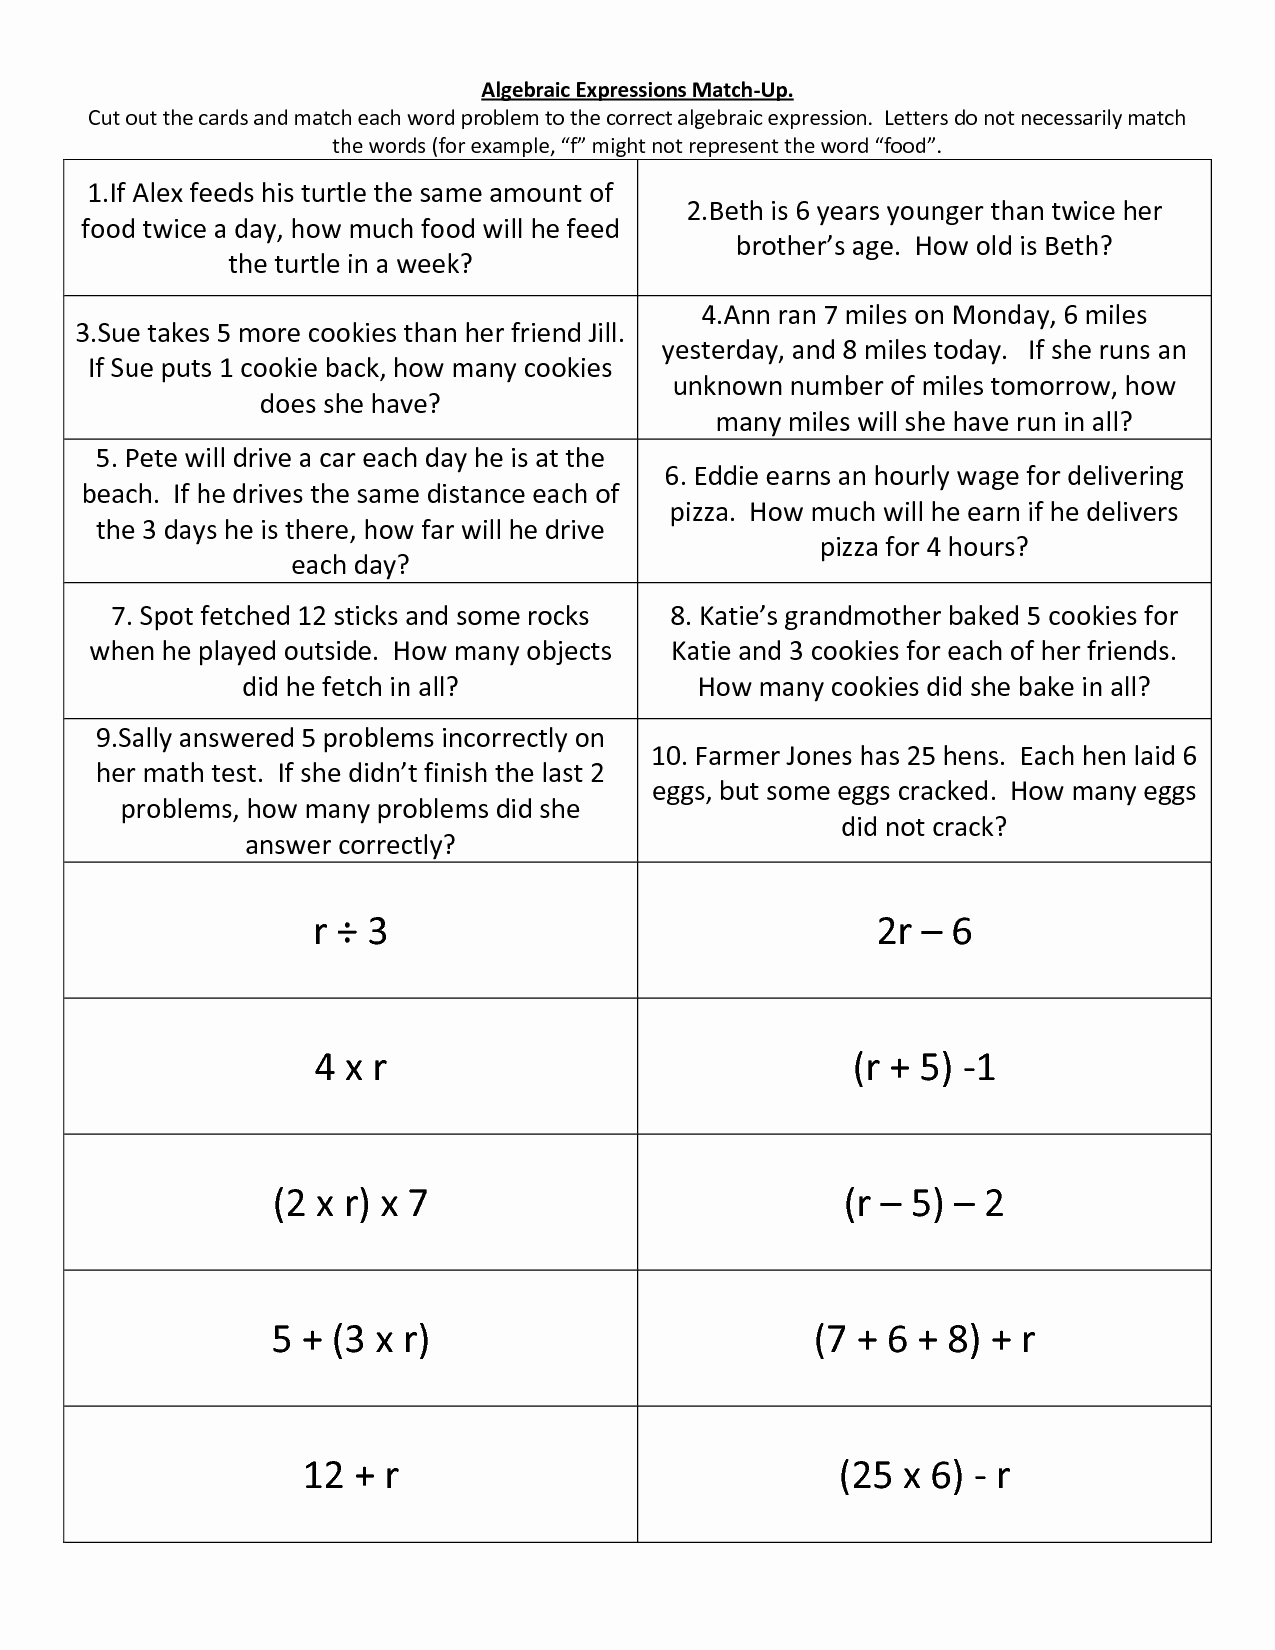 Writing Numerical Expressions Worksheets Unique Numerical Expressions Worksheet 6th Grade